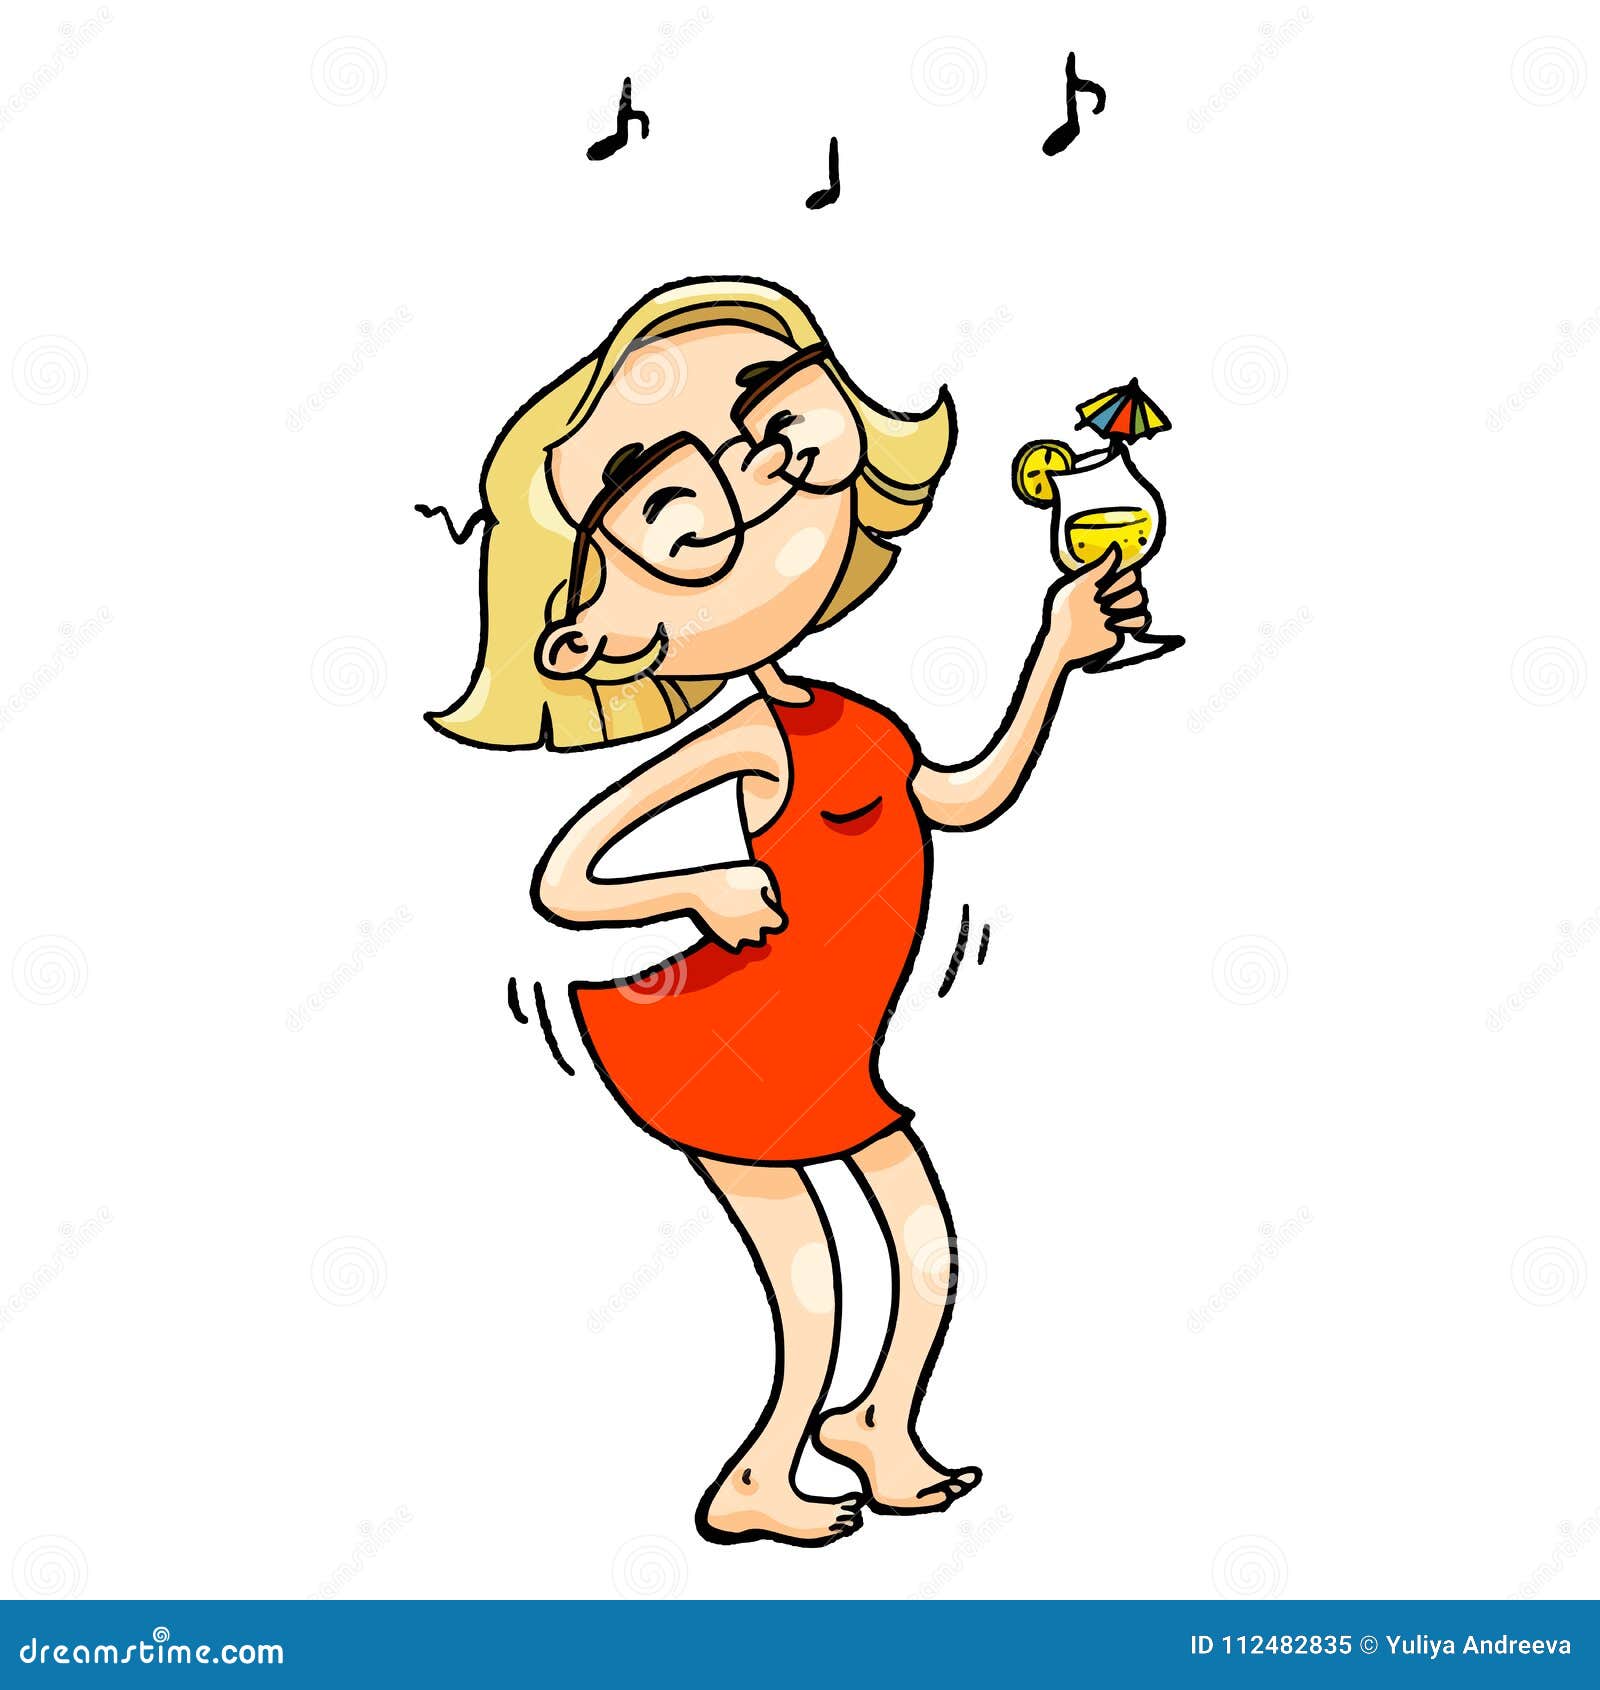 Cute Dancing Cartoon Girl with Glasses, Red Dress and Cocktail Stock